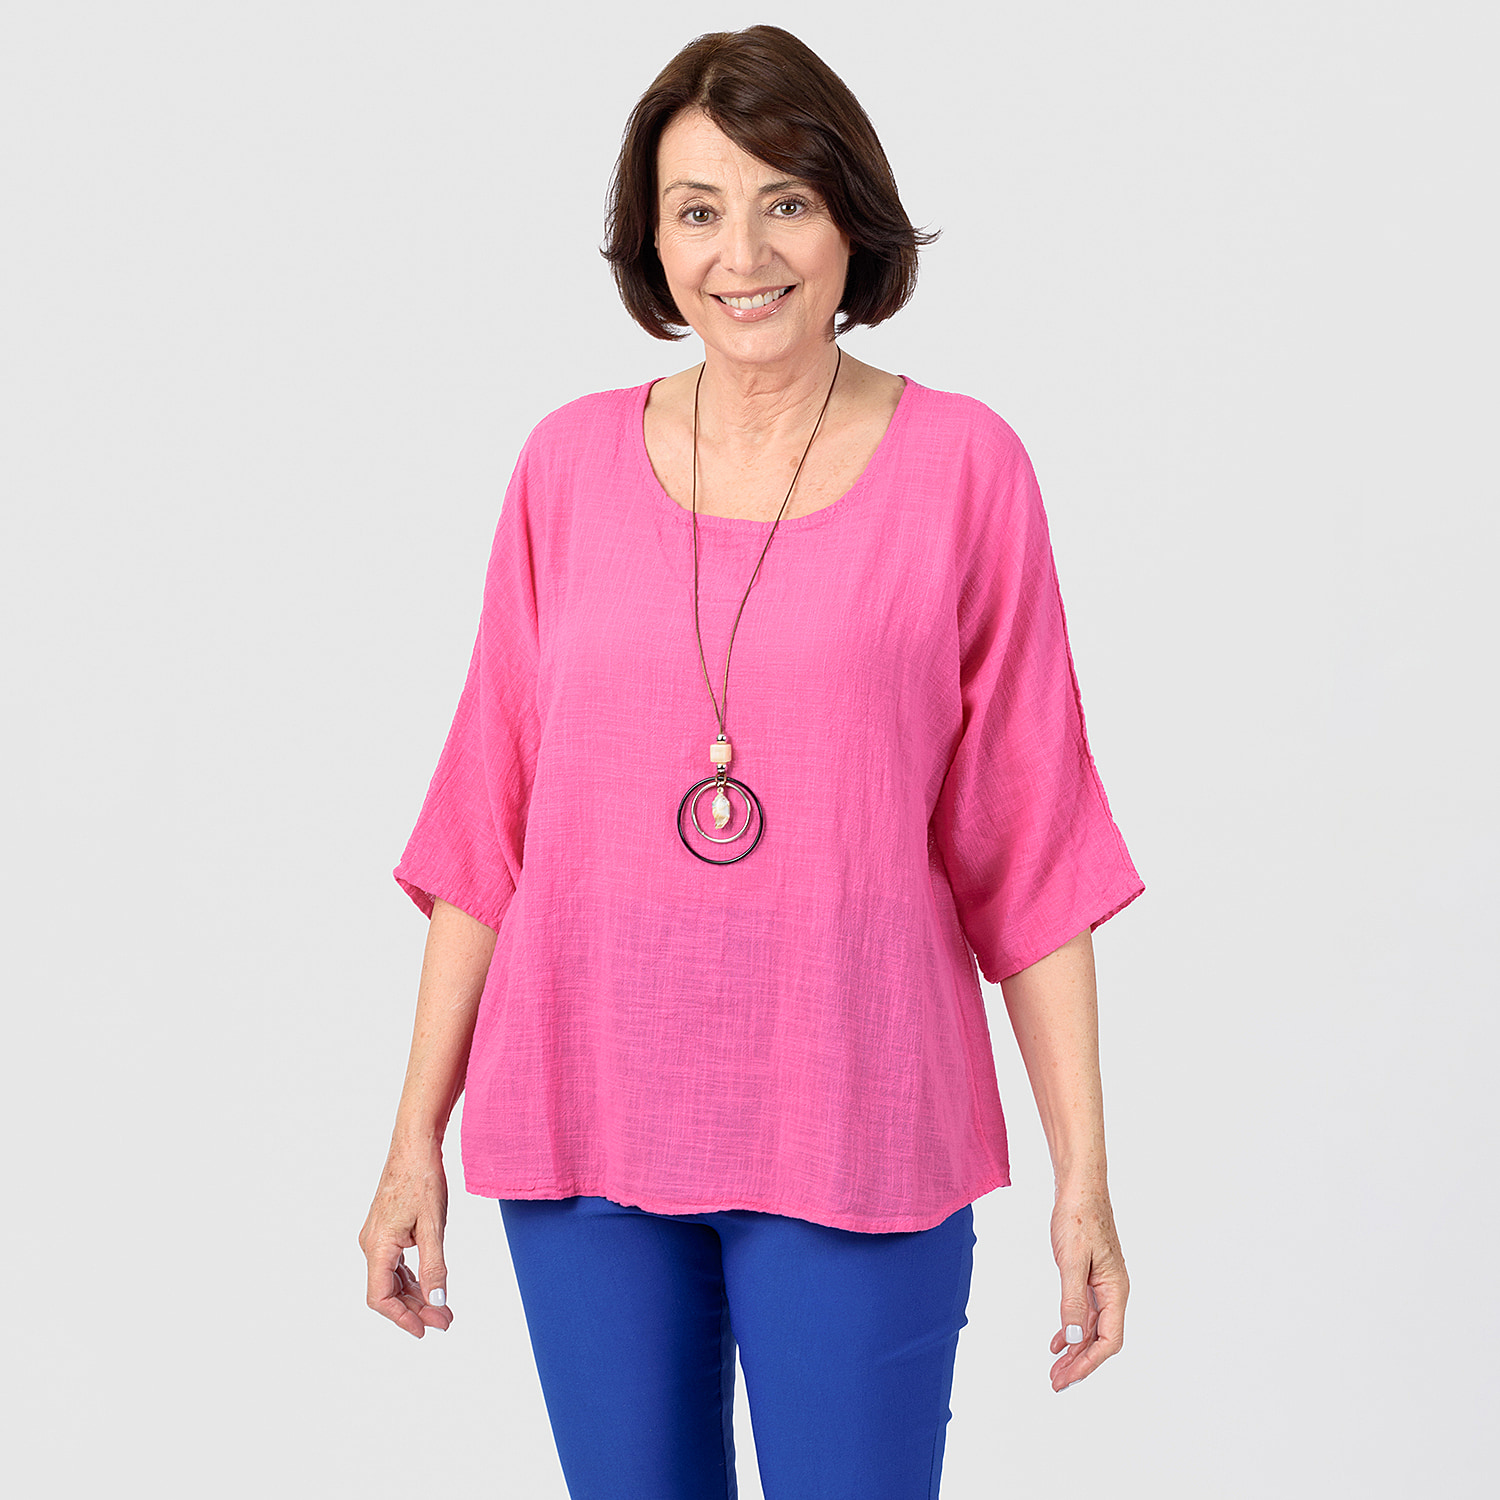 Mudflower 100% Cotton Top with Necklace (One Size,8-18) - Pink